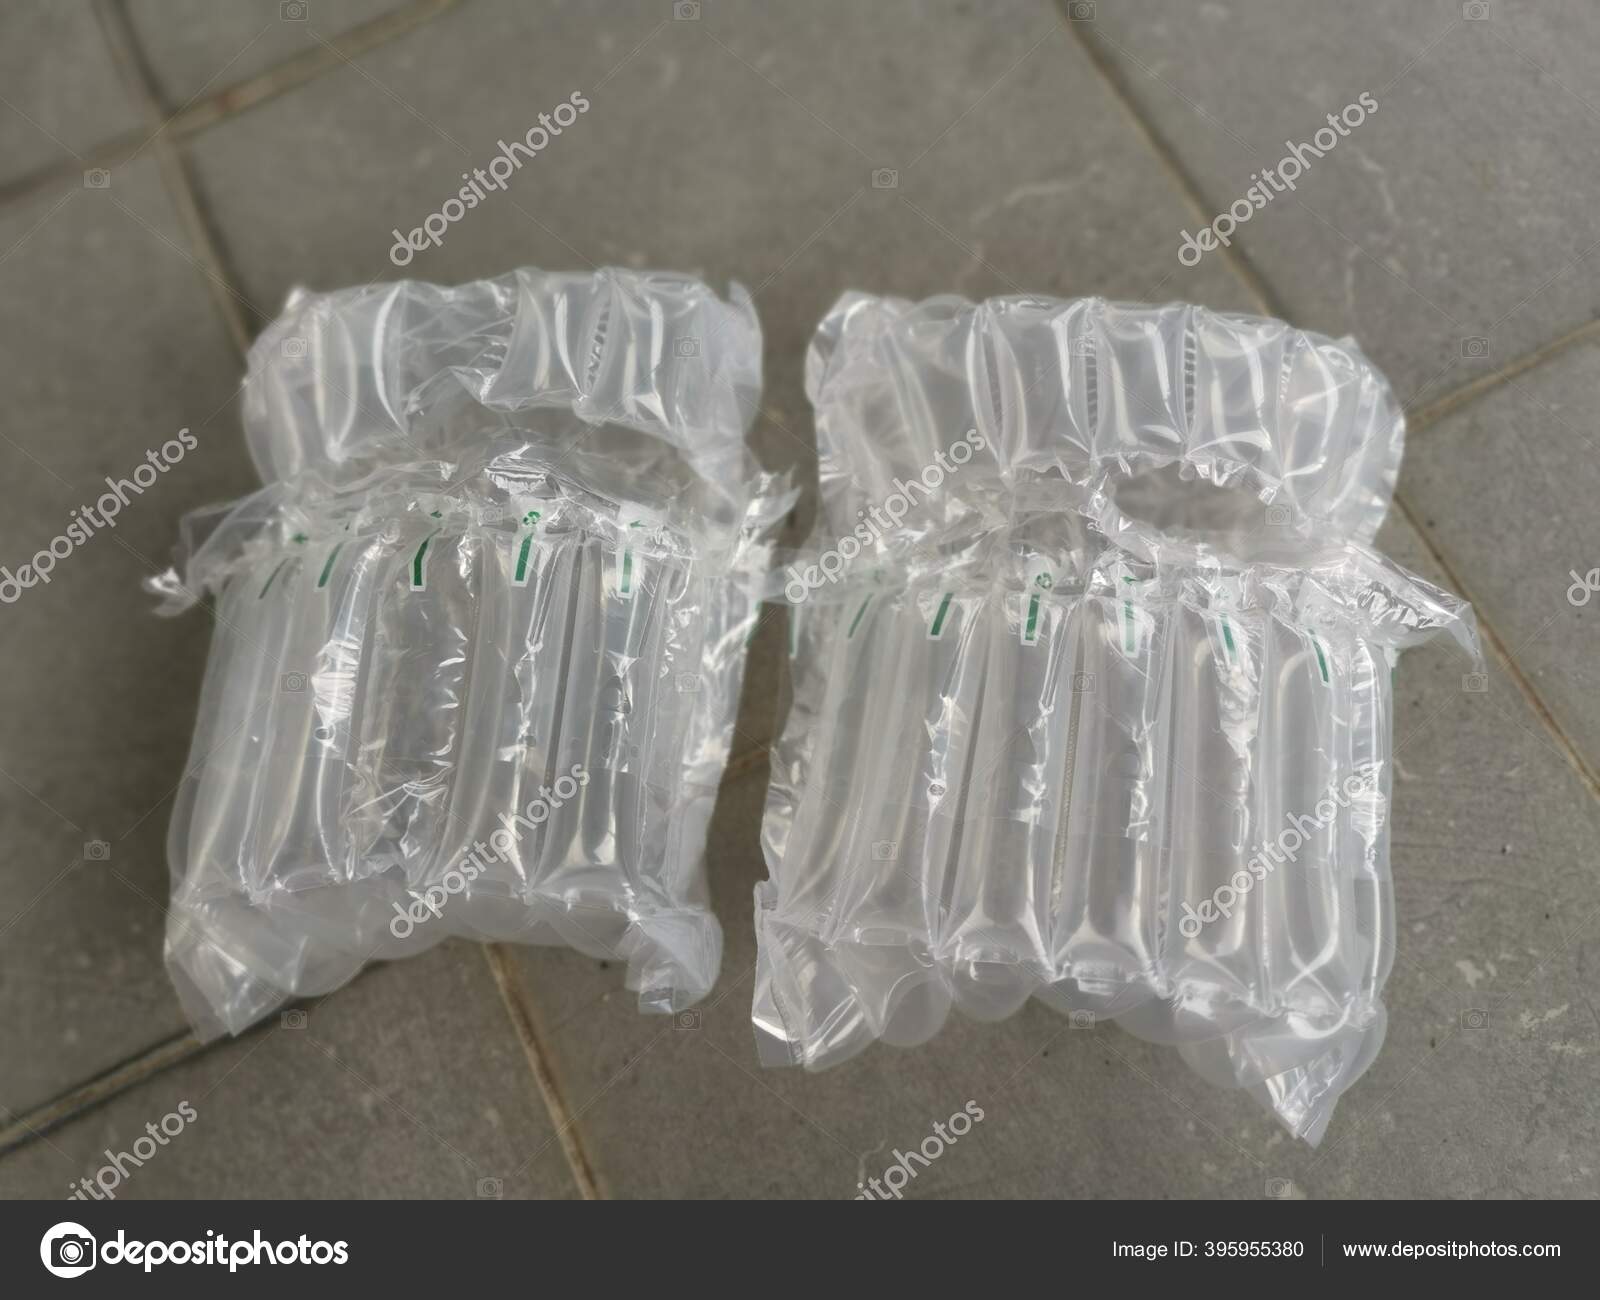 Inflatable Plastic Air Bags Protective Parcel Wrapping Stock Photo